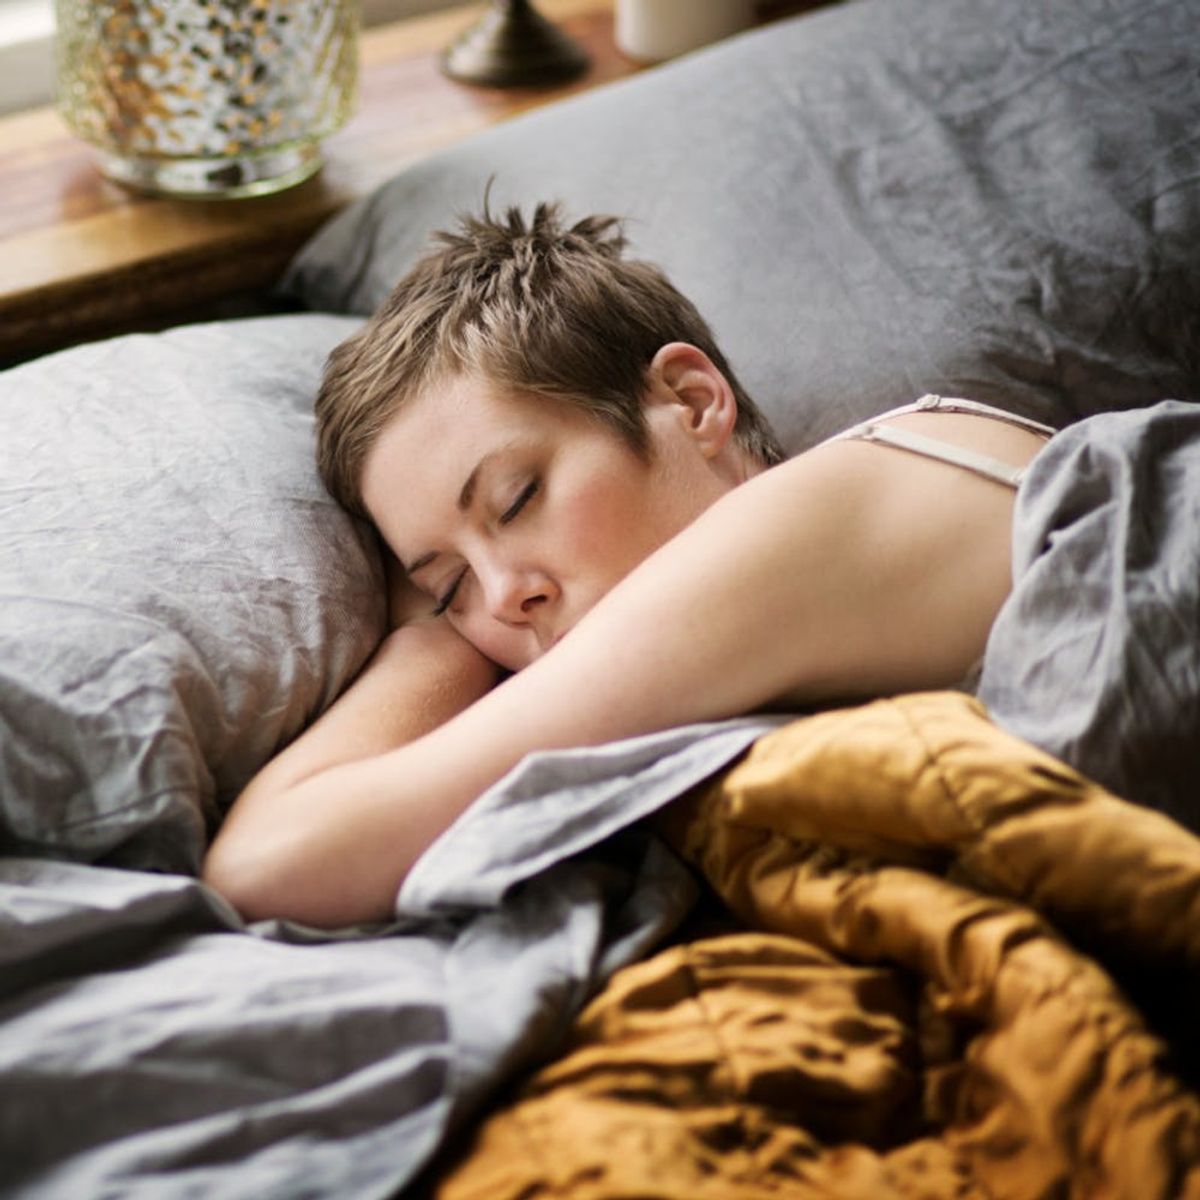 5 Tried-and-True Tips for a Better Night’s Sleep